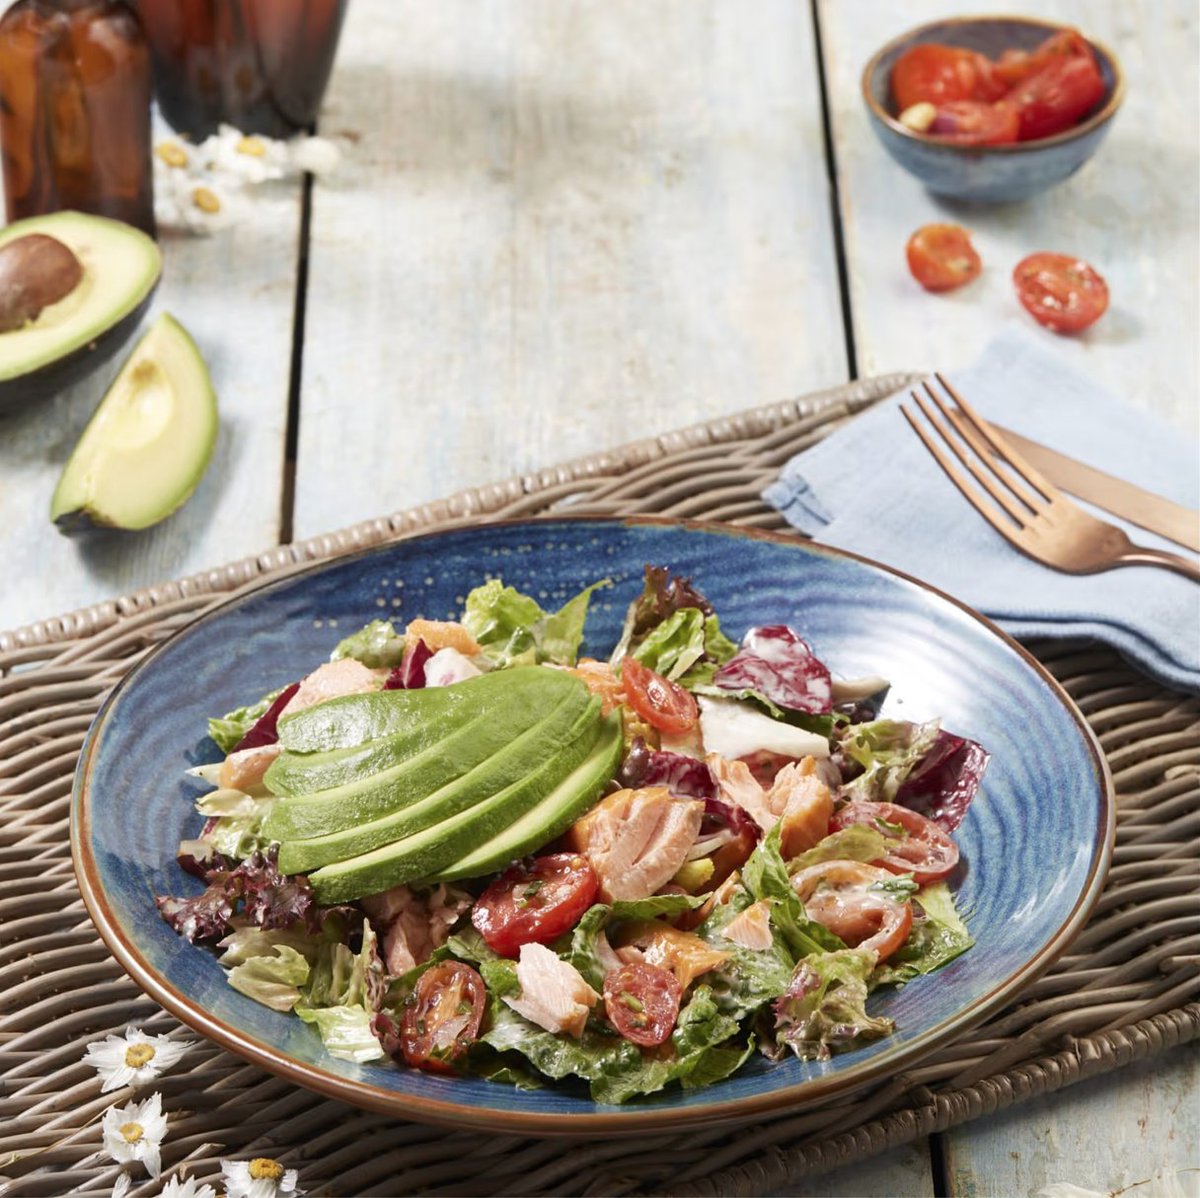 Have you tried the Zizzi Smoked Salmon Salad? Rich, smoky flakes of salmon on avocado, tomato, and mixed salad leaves with a Caesar dressing. Delish.